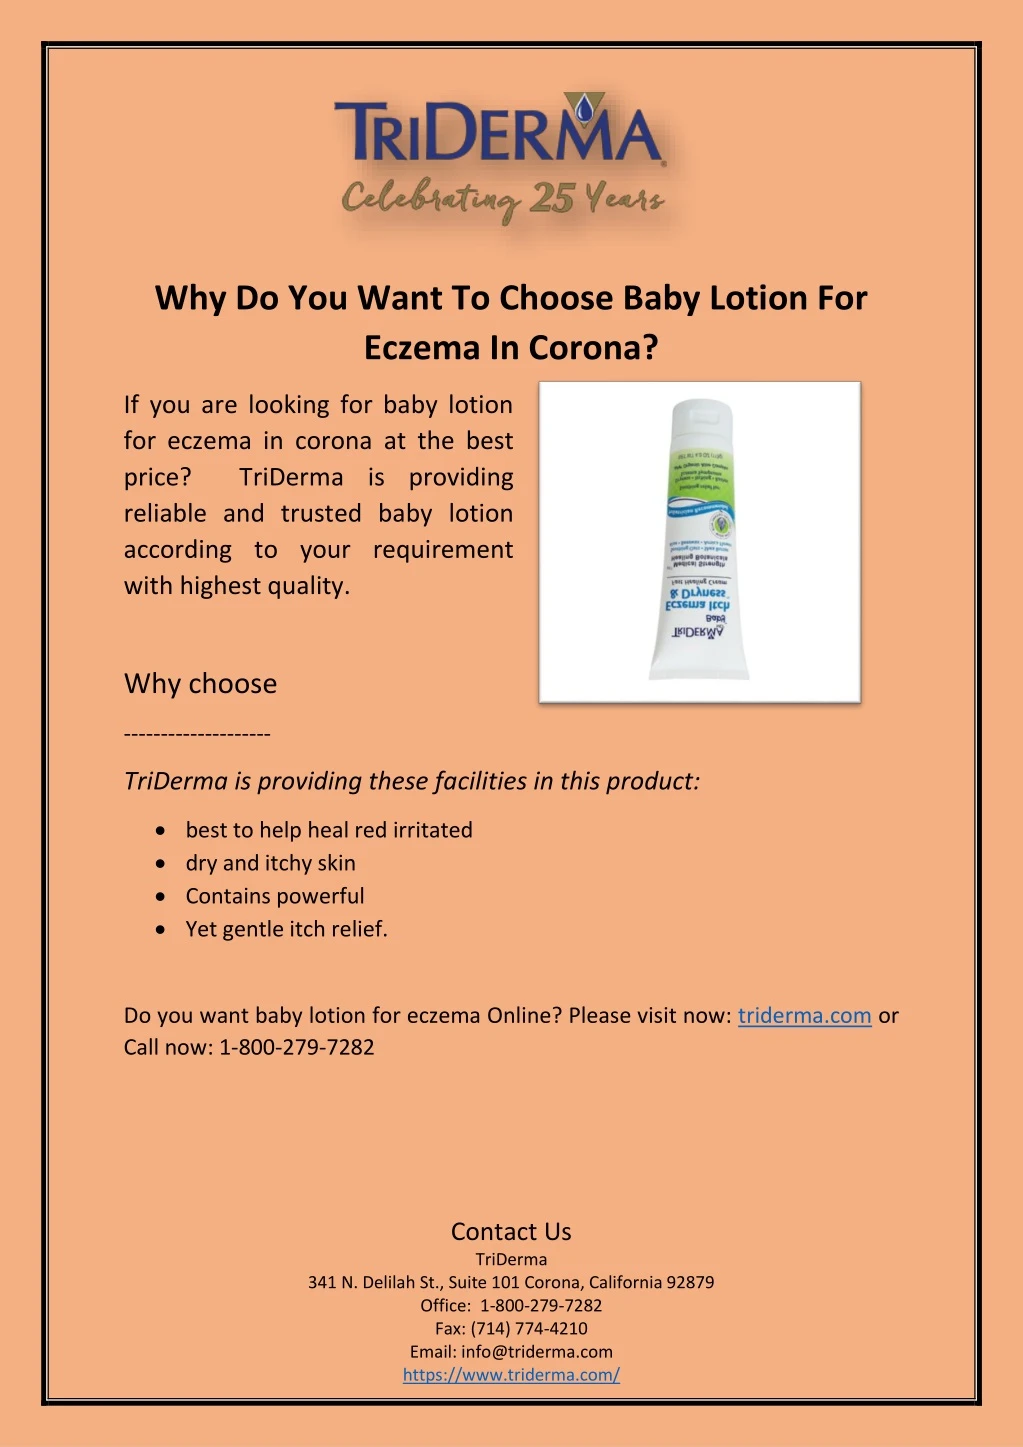 why do you want to choose baby lotion for eczema